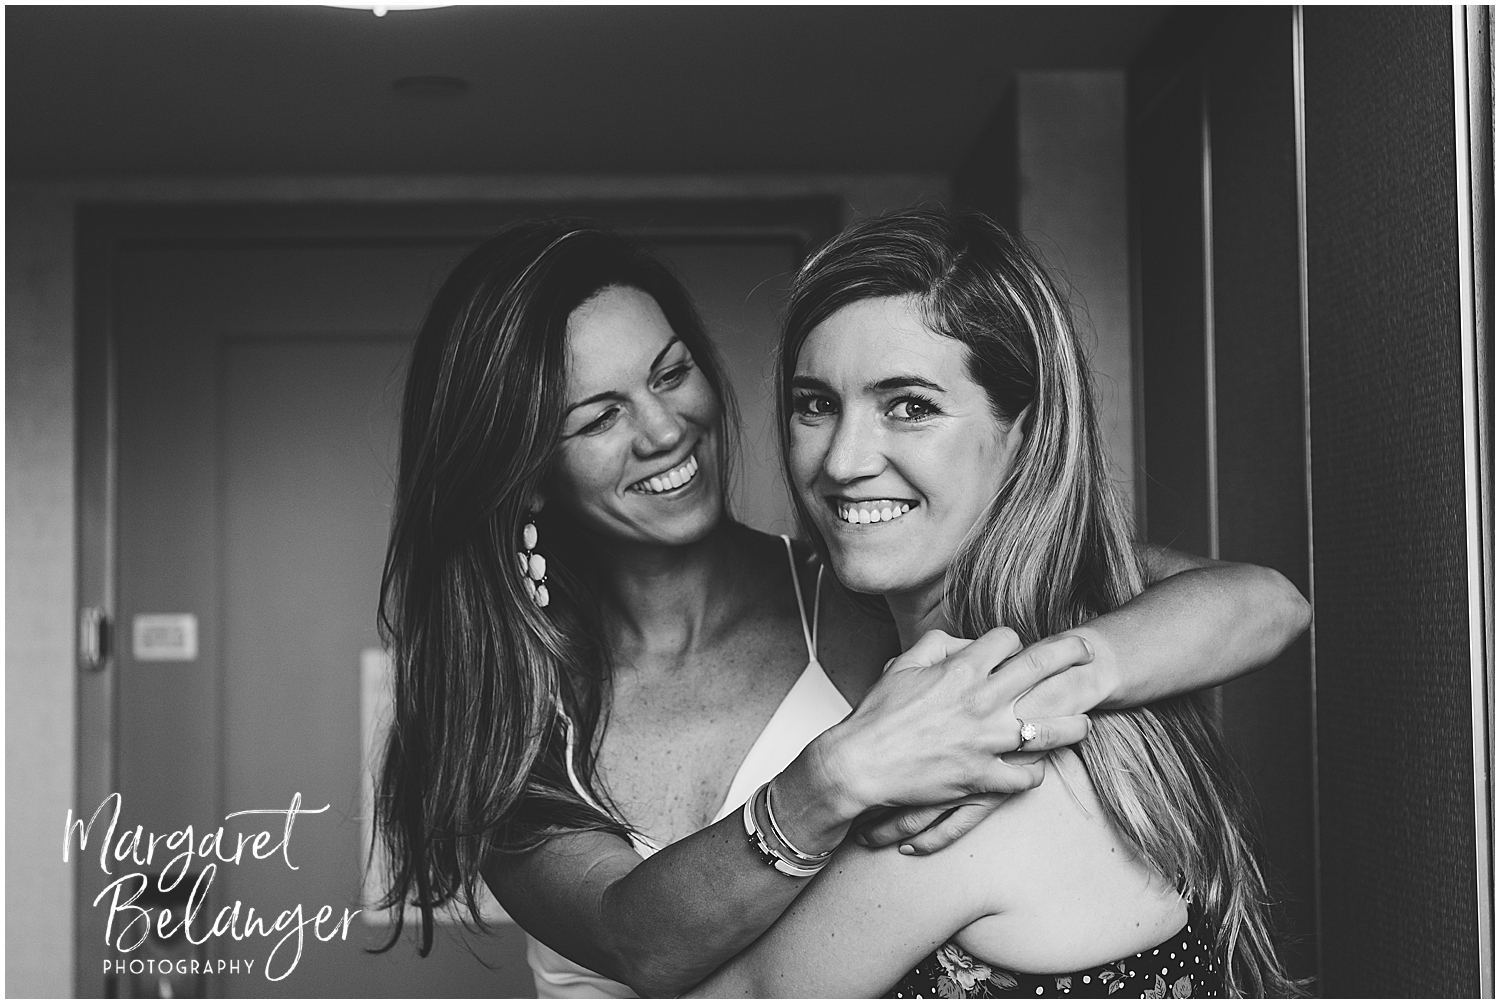 The bride and her sister embracing and smiling in a happy moment.